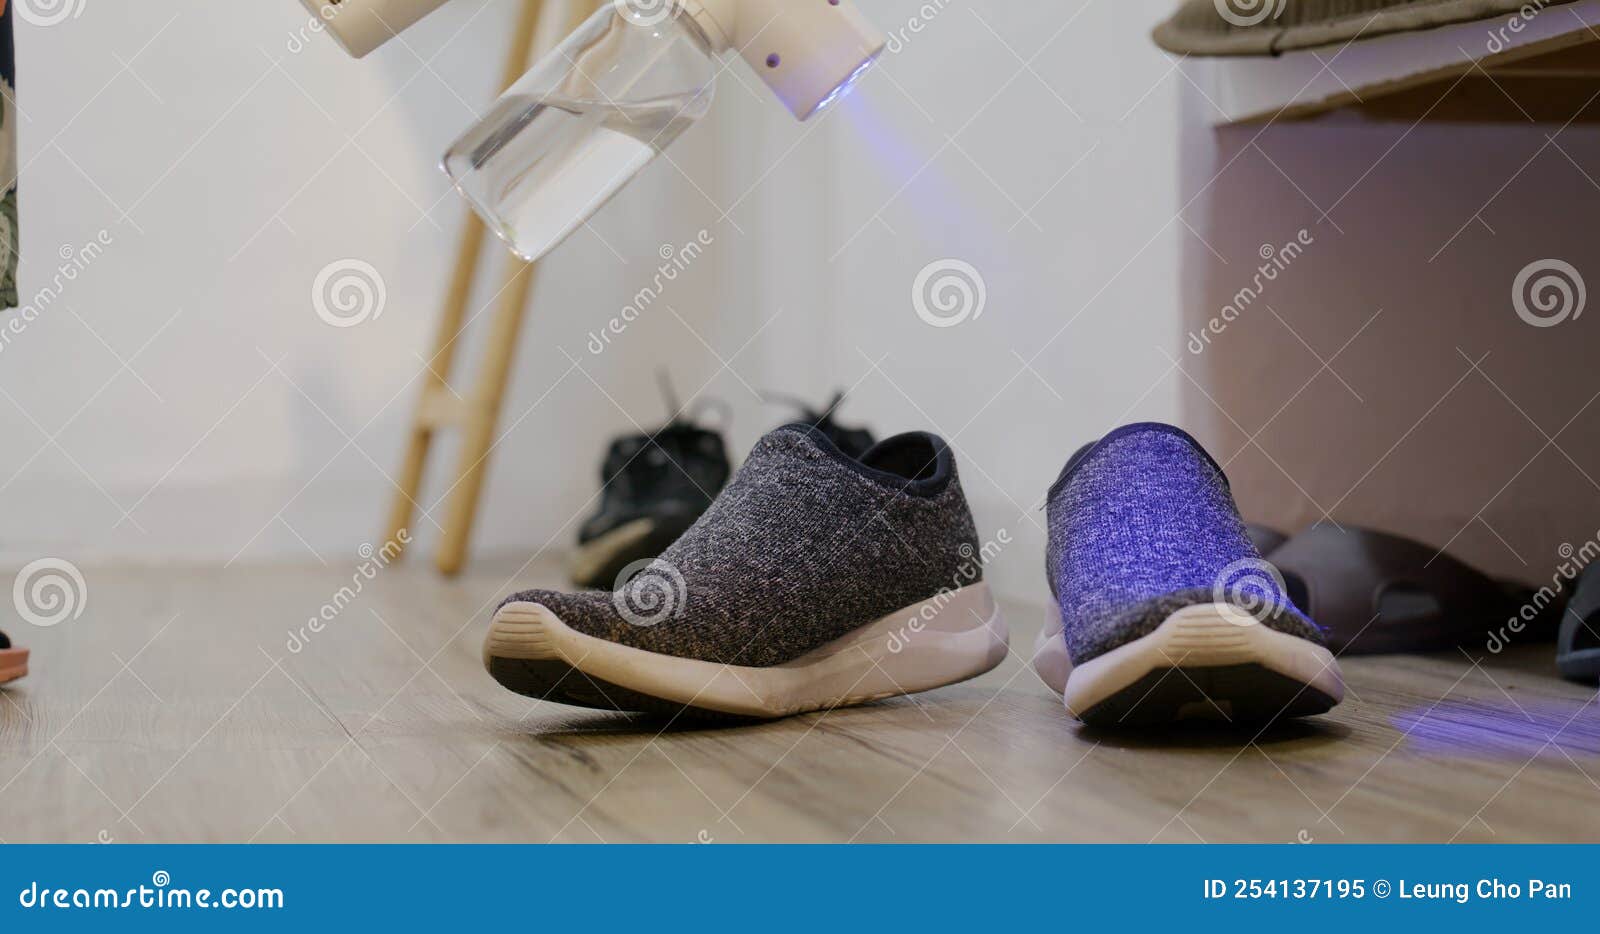 UV Light Alcohol Spray for Cleaning Shoes Stock Image - Image of person,  bacterial: 254137195